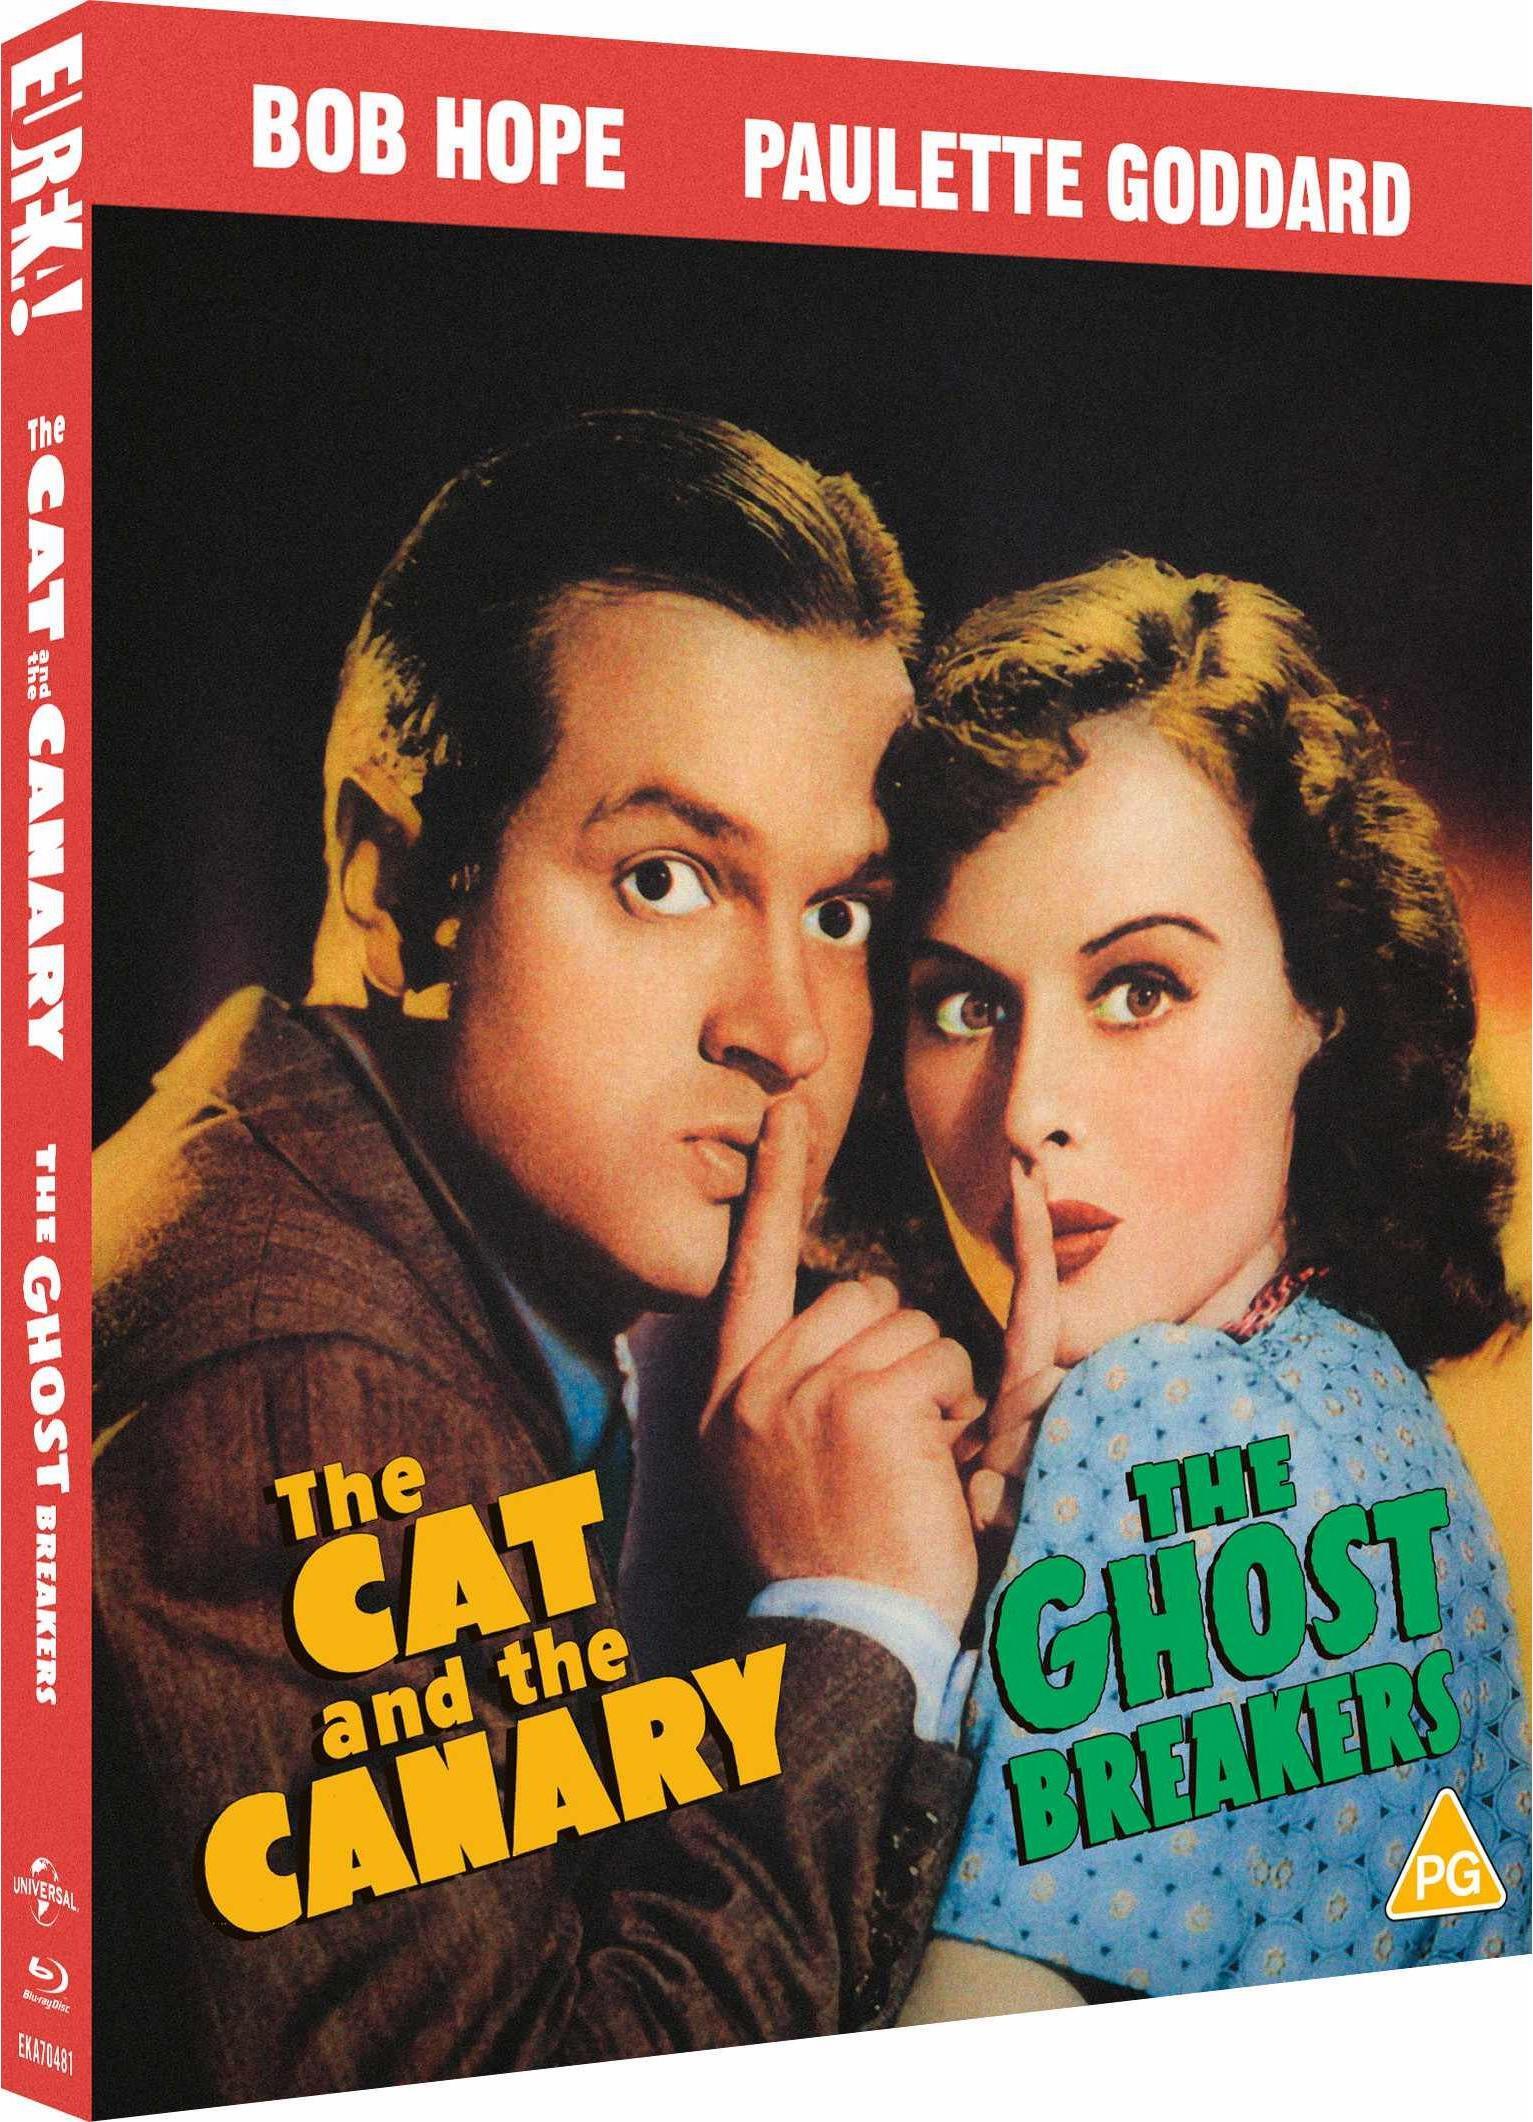 THE CAT AND THE CANARY / THE GHOST BREAKERS (REGION B IMPORT - LIMITED EDITION) BLU-RAY